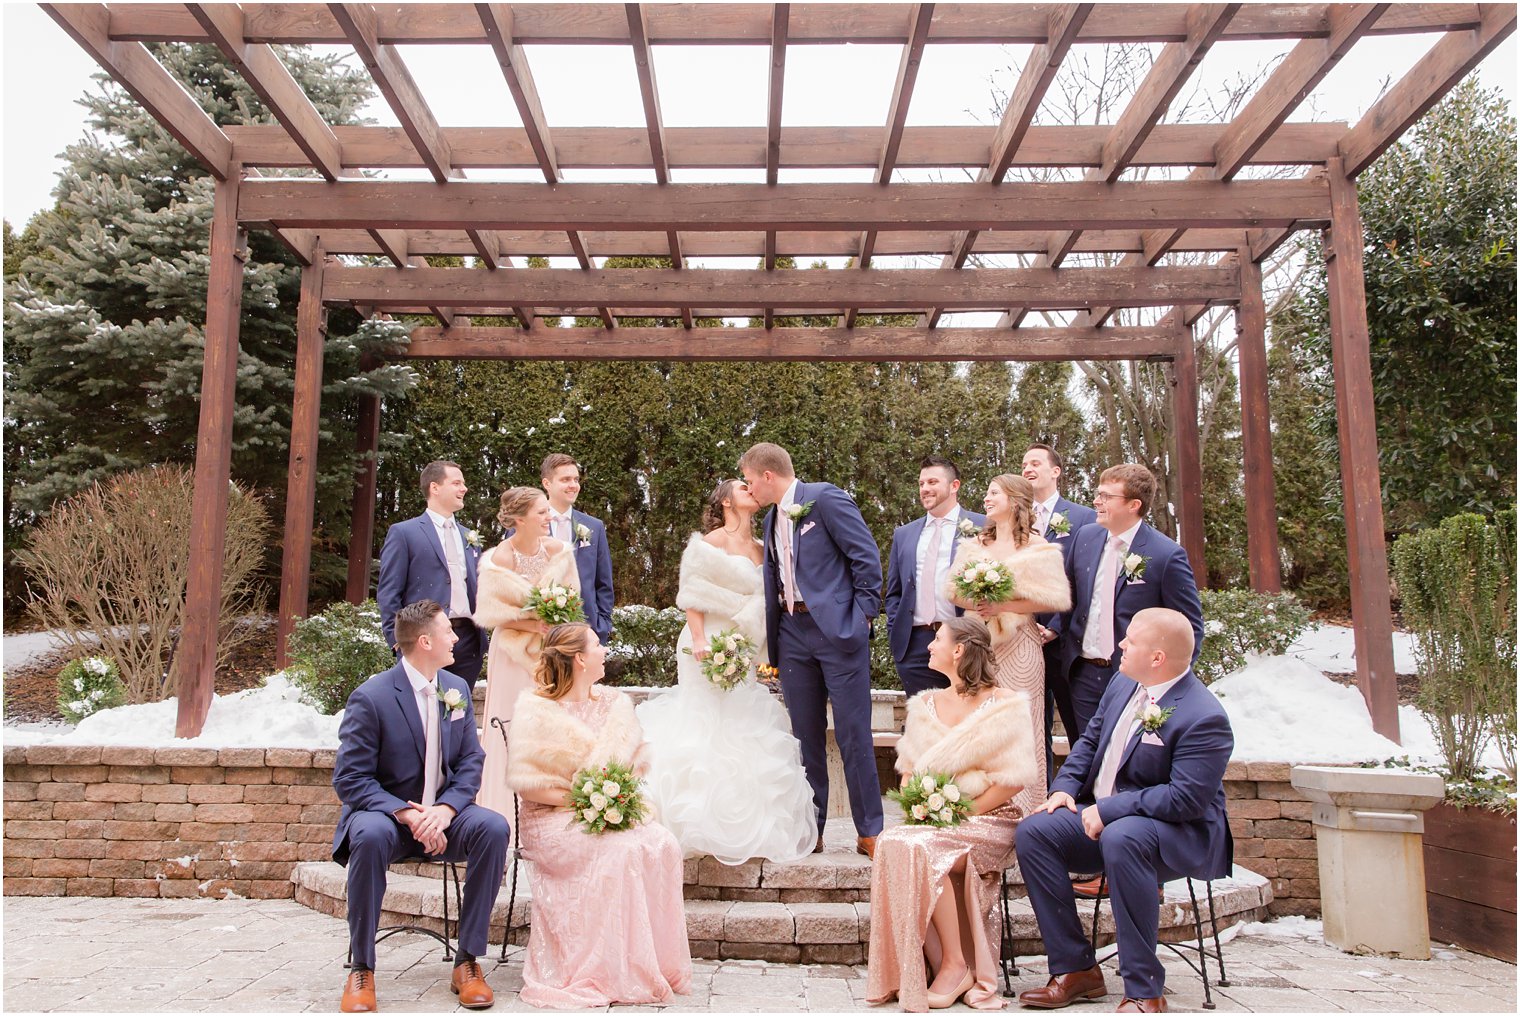 Bridal party in rose gold and navy | Stone House at Stirling Ridge in Warren, NJ